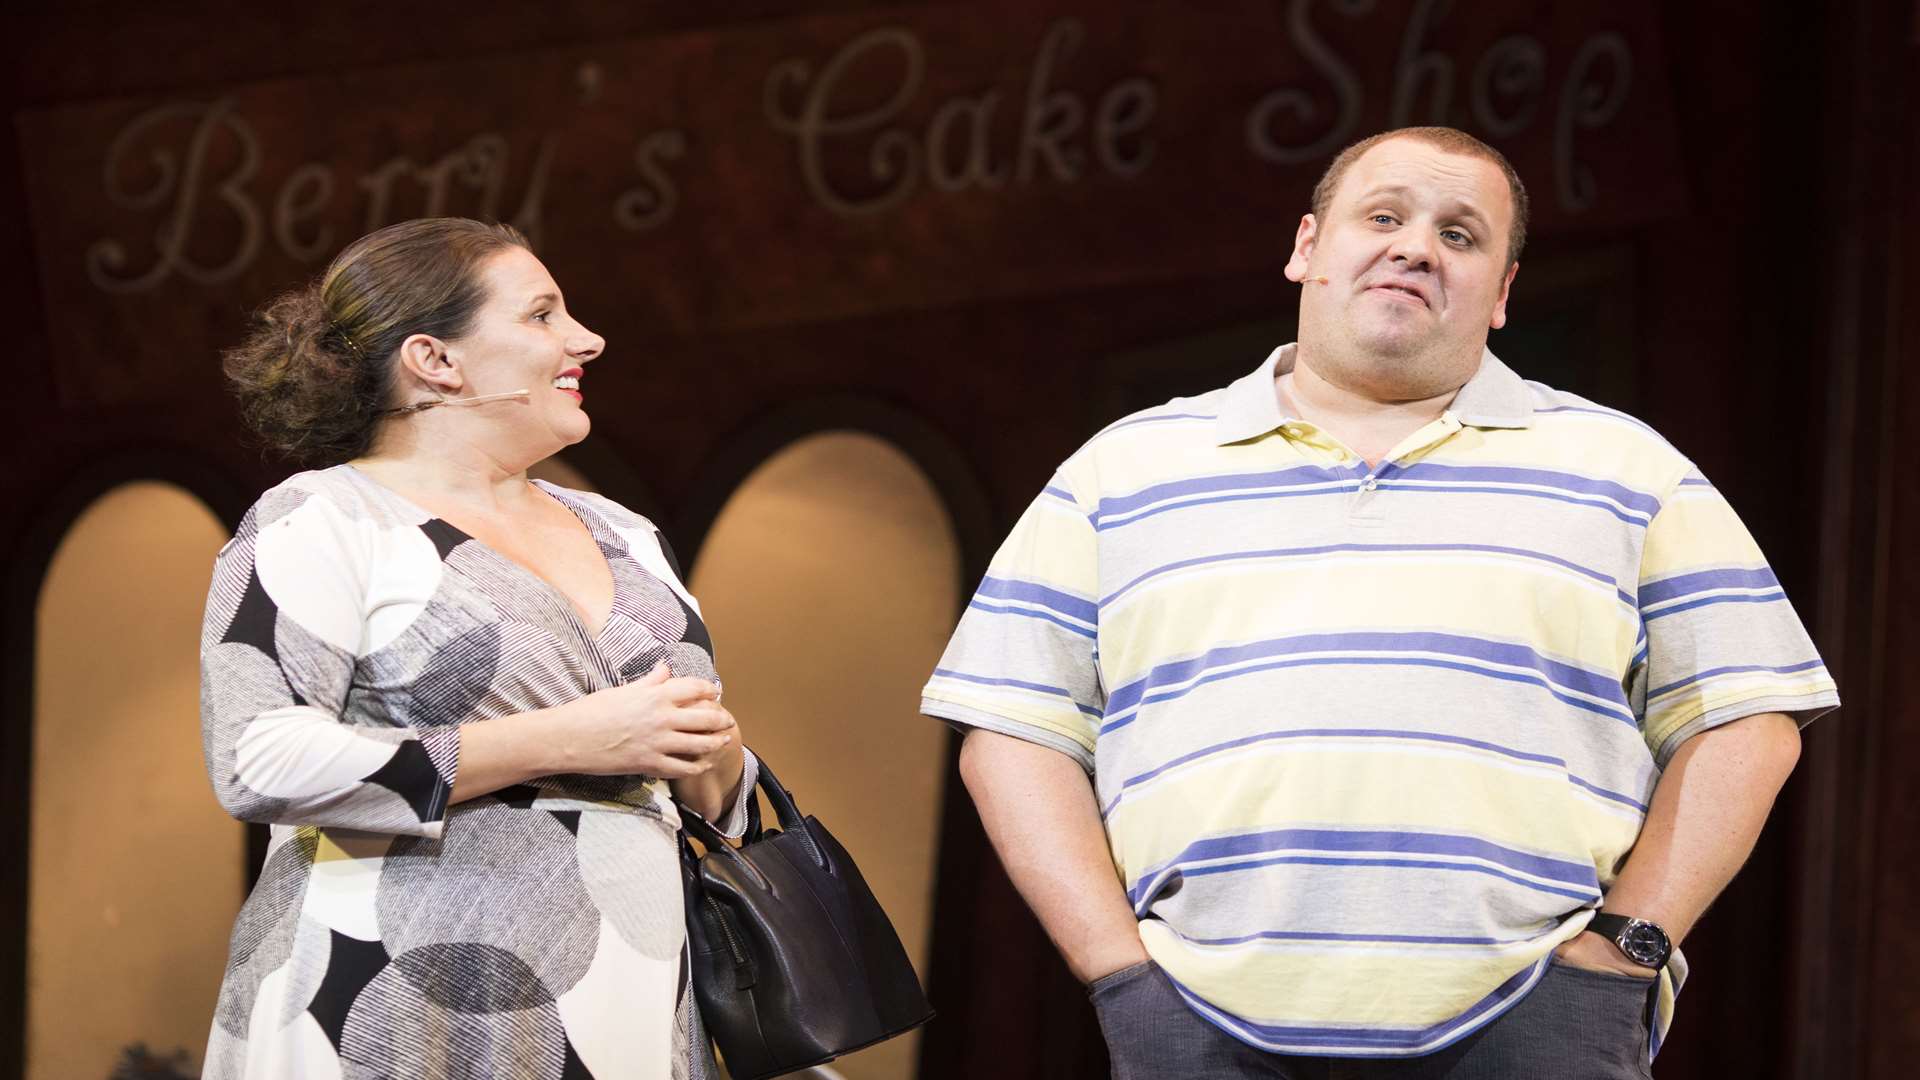 Sam Bailey stars in Kay Mellor's Fat Friends with Neil Hurst, which will be staged in Bromley and Dartford